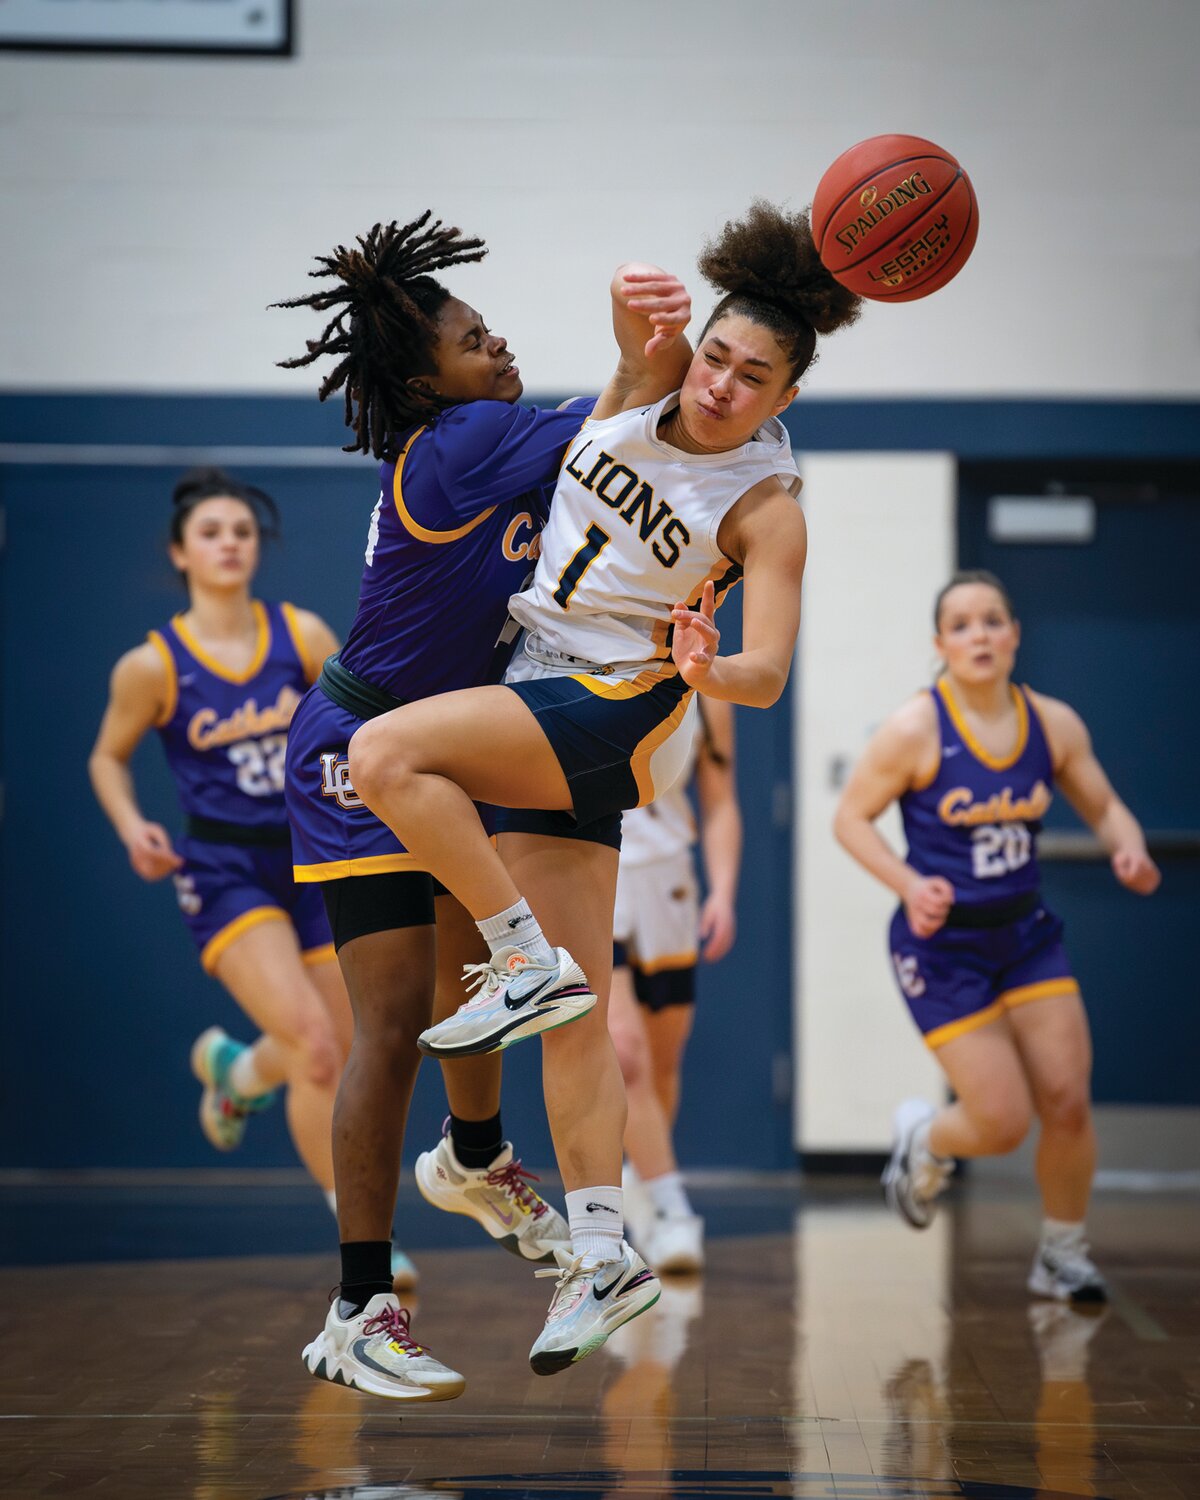 New Hope-Solebury’s Nina Meixler gets off a pass as Lancaster Catholic’s Carleigh Anderson crashes into her during Tuesday’s PIAA second-round game.